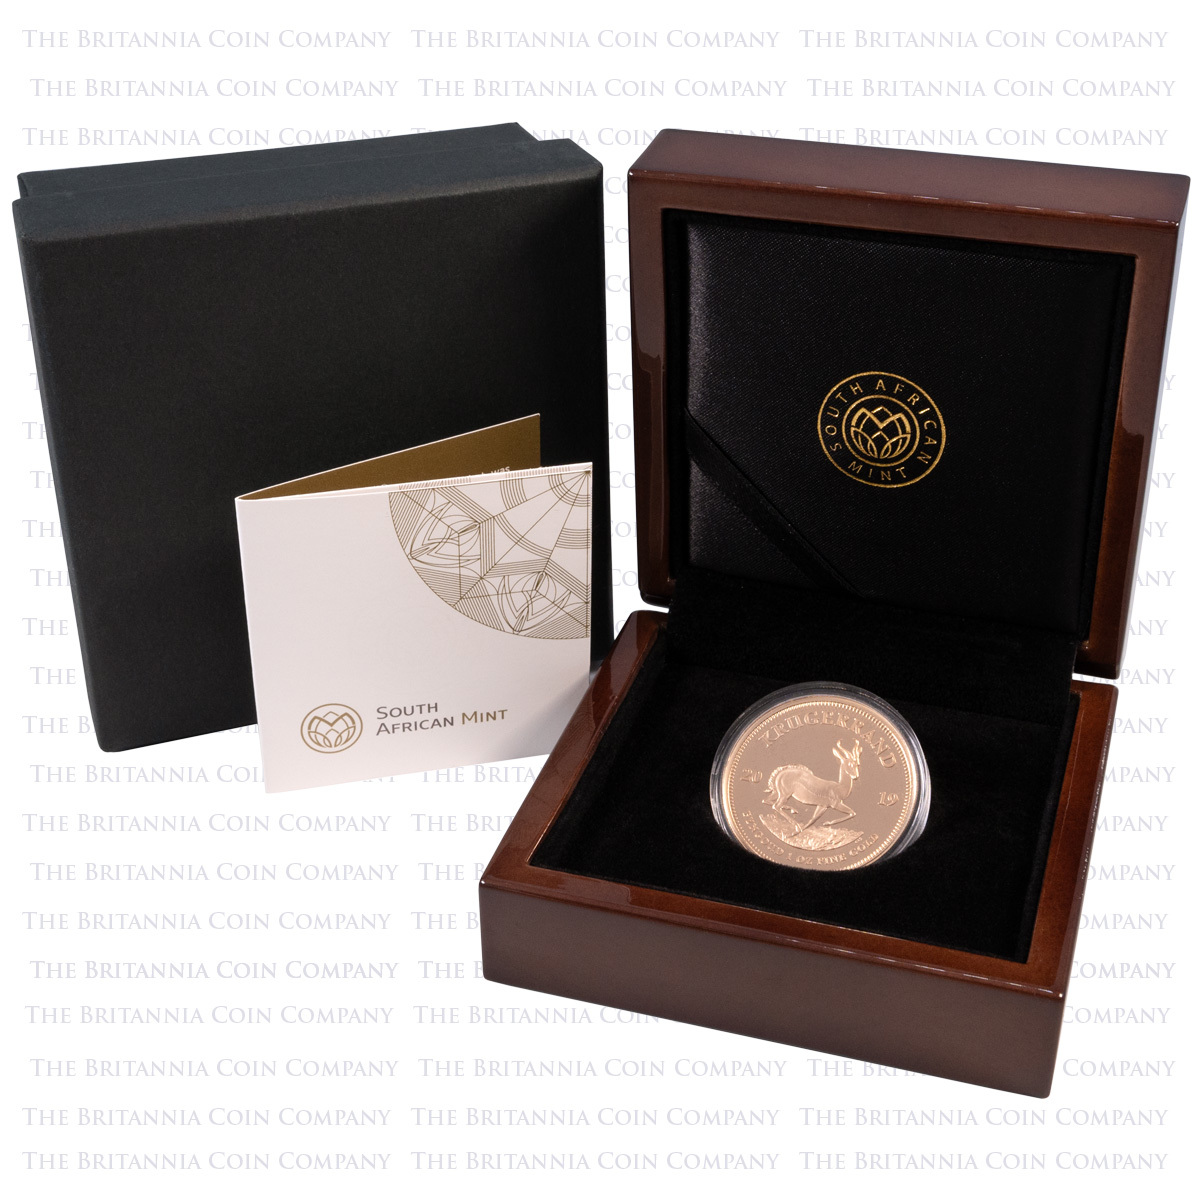 SA19KRGP 2019 South Africa Krugerrand One Ounce Gold Proof Coin In Box